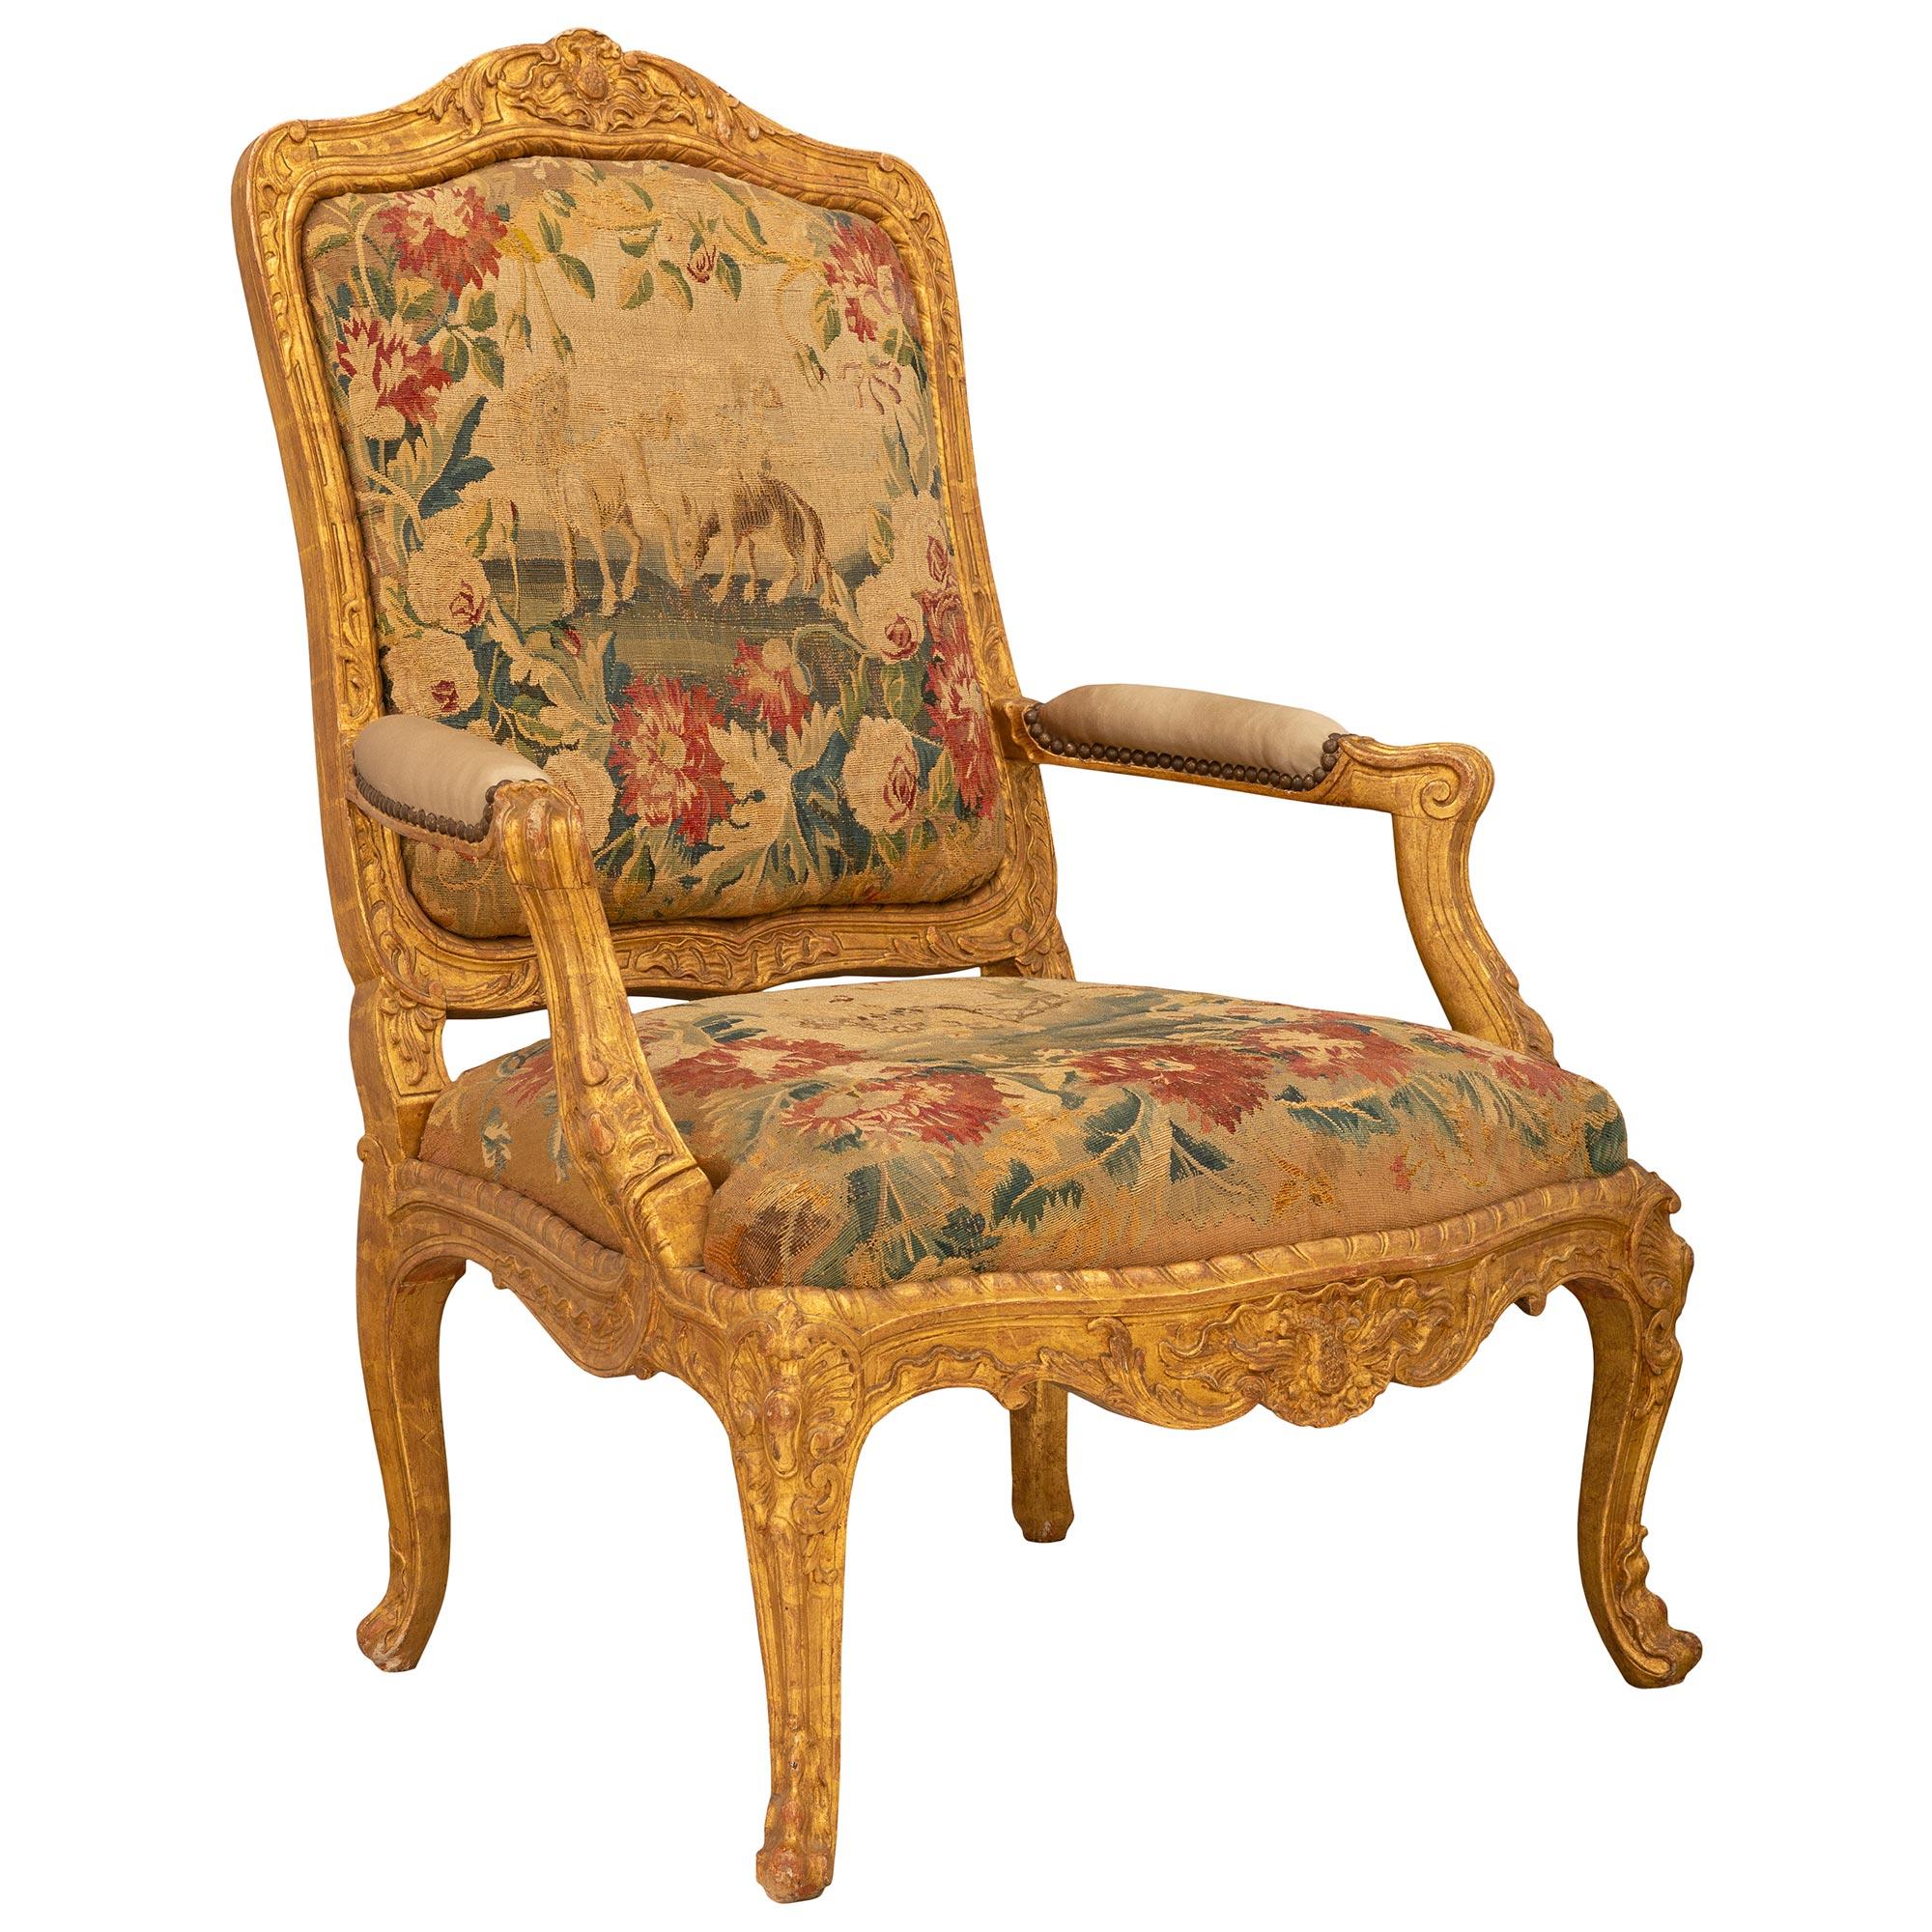 A beautiful and high quality set of four French early 19th century Louis XV st. giltwood and tapestry armchairs. Each armchair is raised by elegant cabriole legs with lovely carved foliate designs and finely carved seashell reserves at each corner.